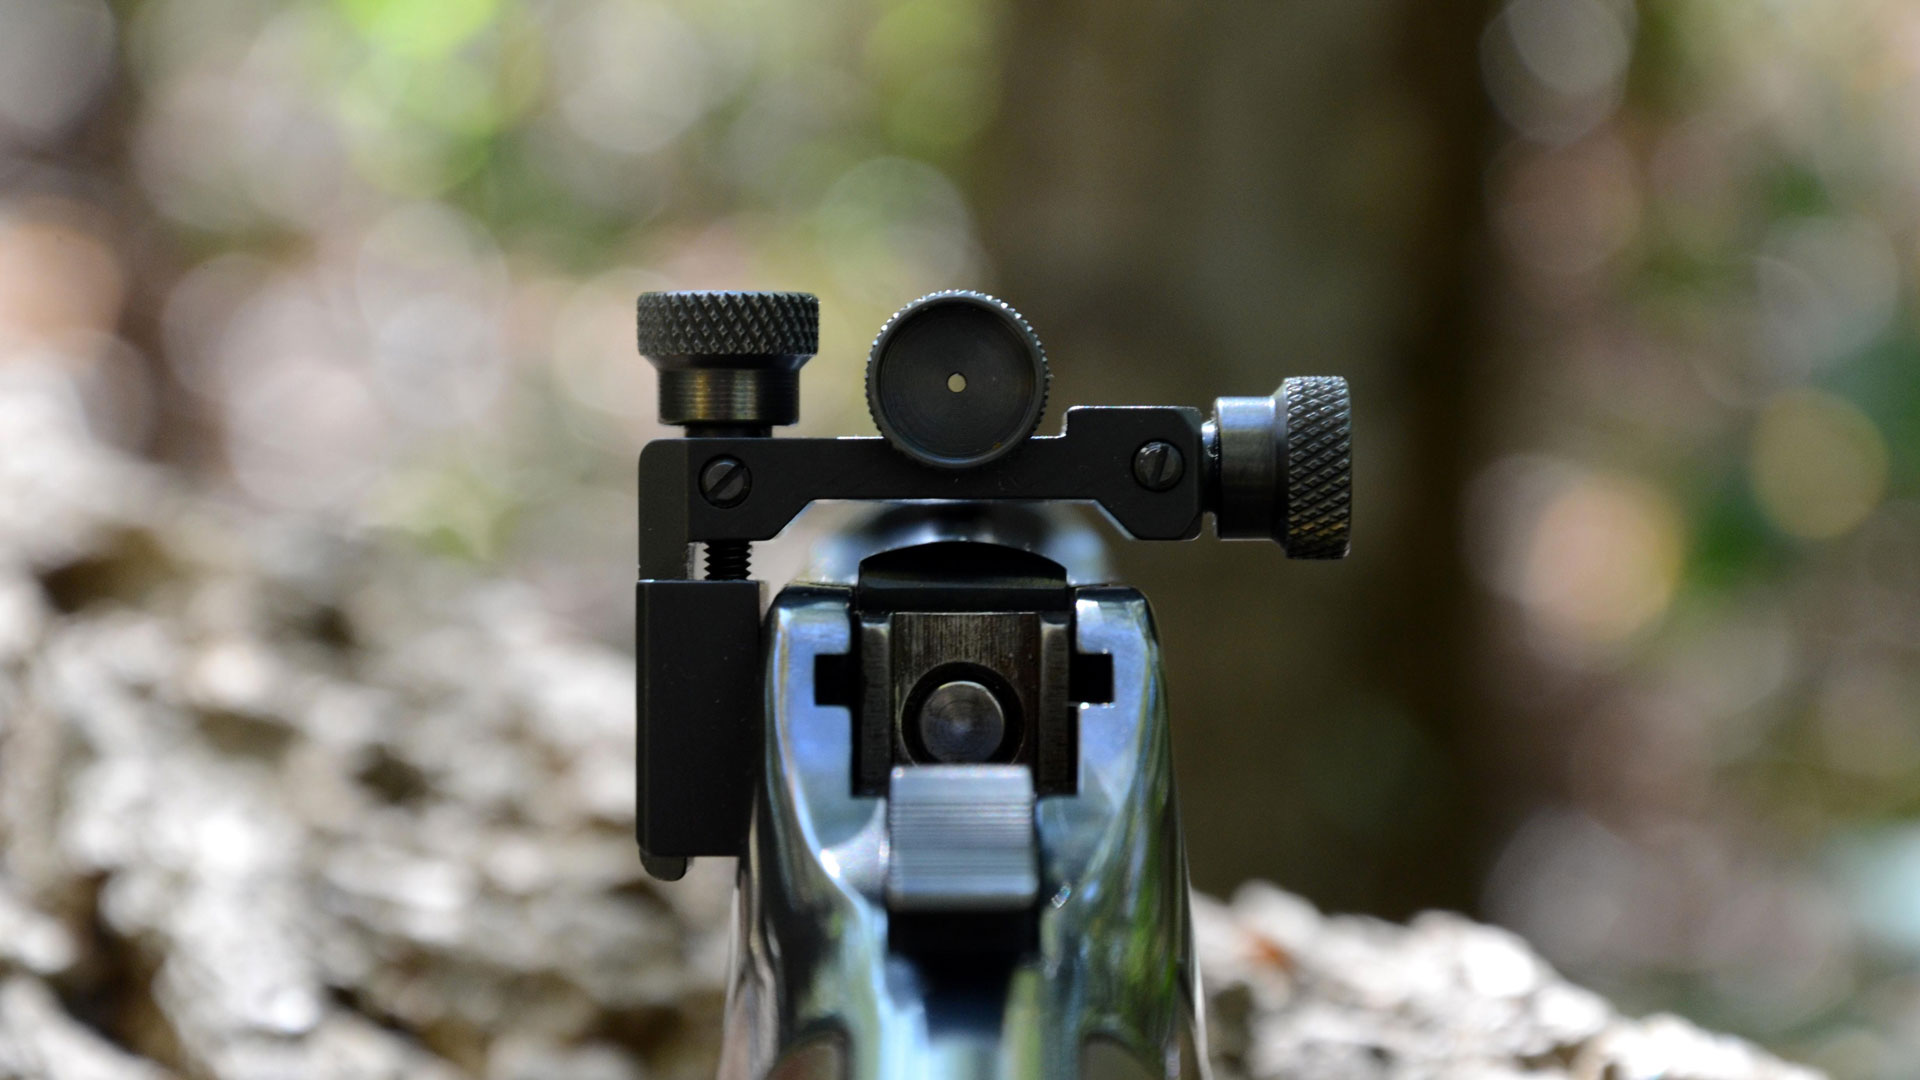 The Greatest Guide To Innovative Ways To Sight In Rifle Scopes, Night Sights, Red Dots